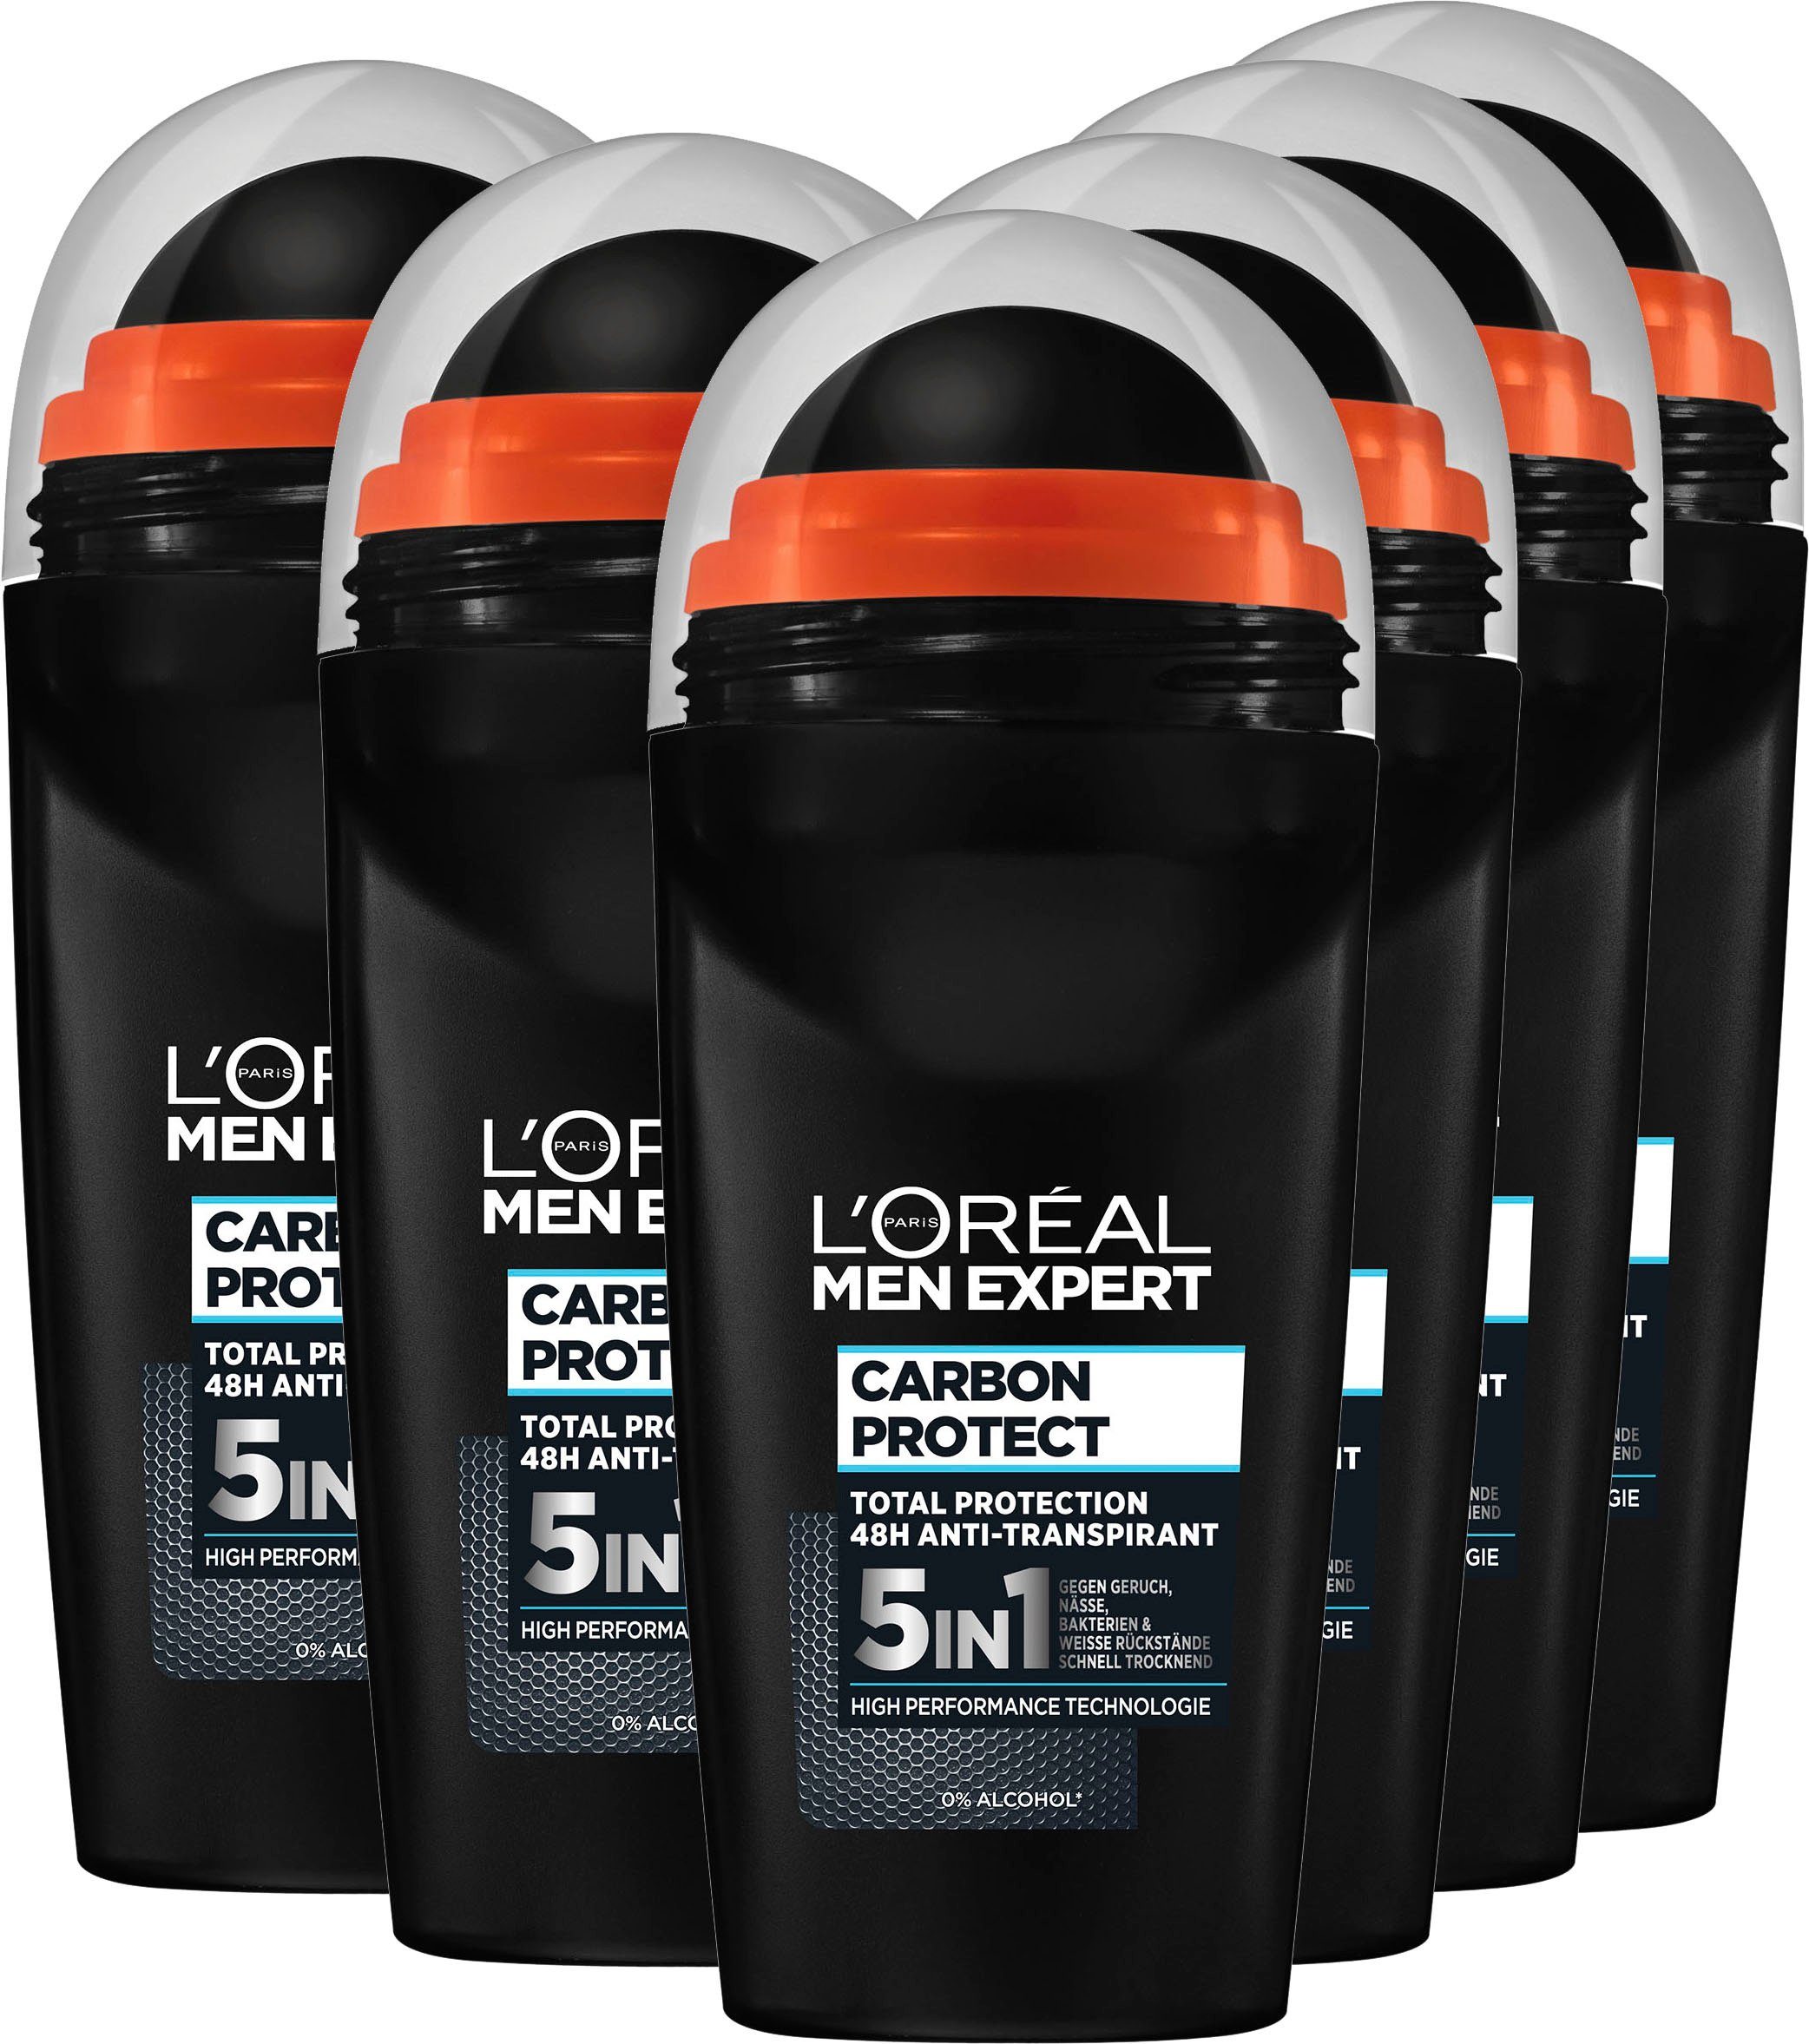 L'ORÉAL PARIS MEN EXPERT Deo-Roller »Deo Roll-on Carbon Protect«, Packung,  5+1 online kaufen | OTTO